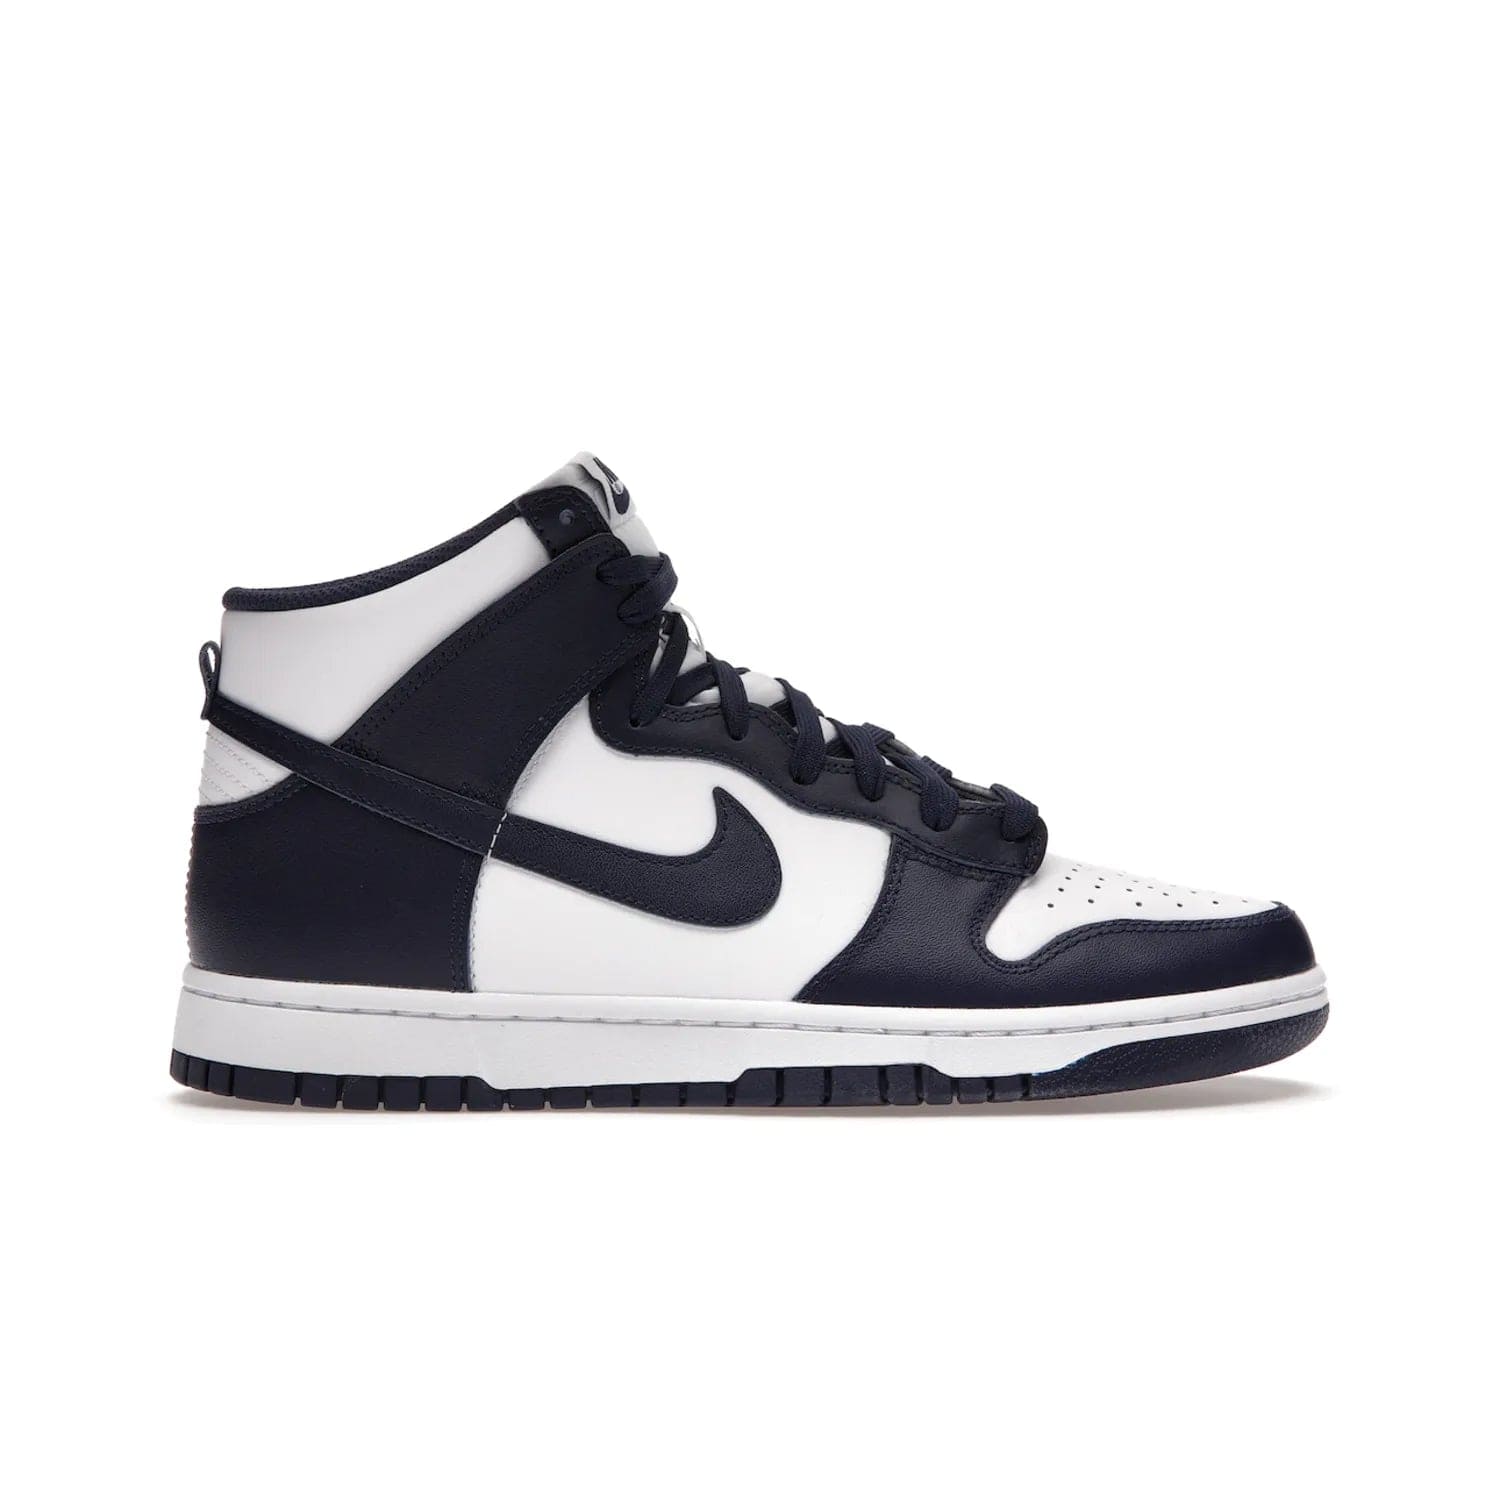 Nike Dunk High Championship Navy - Image 1 - Only at www.BallersClubKickz.com - Classic Nike Dunk High sneaker delivers an unforgettable style with white leather upper, Championship Navy overlays, and matching woven tongue label and sole. Make a statement with the Championship Navy today.